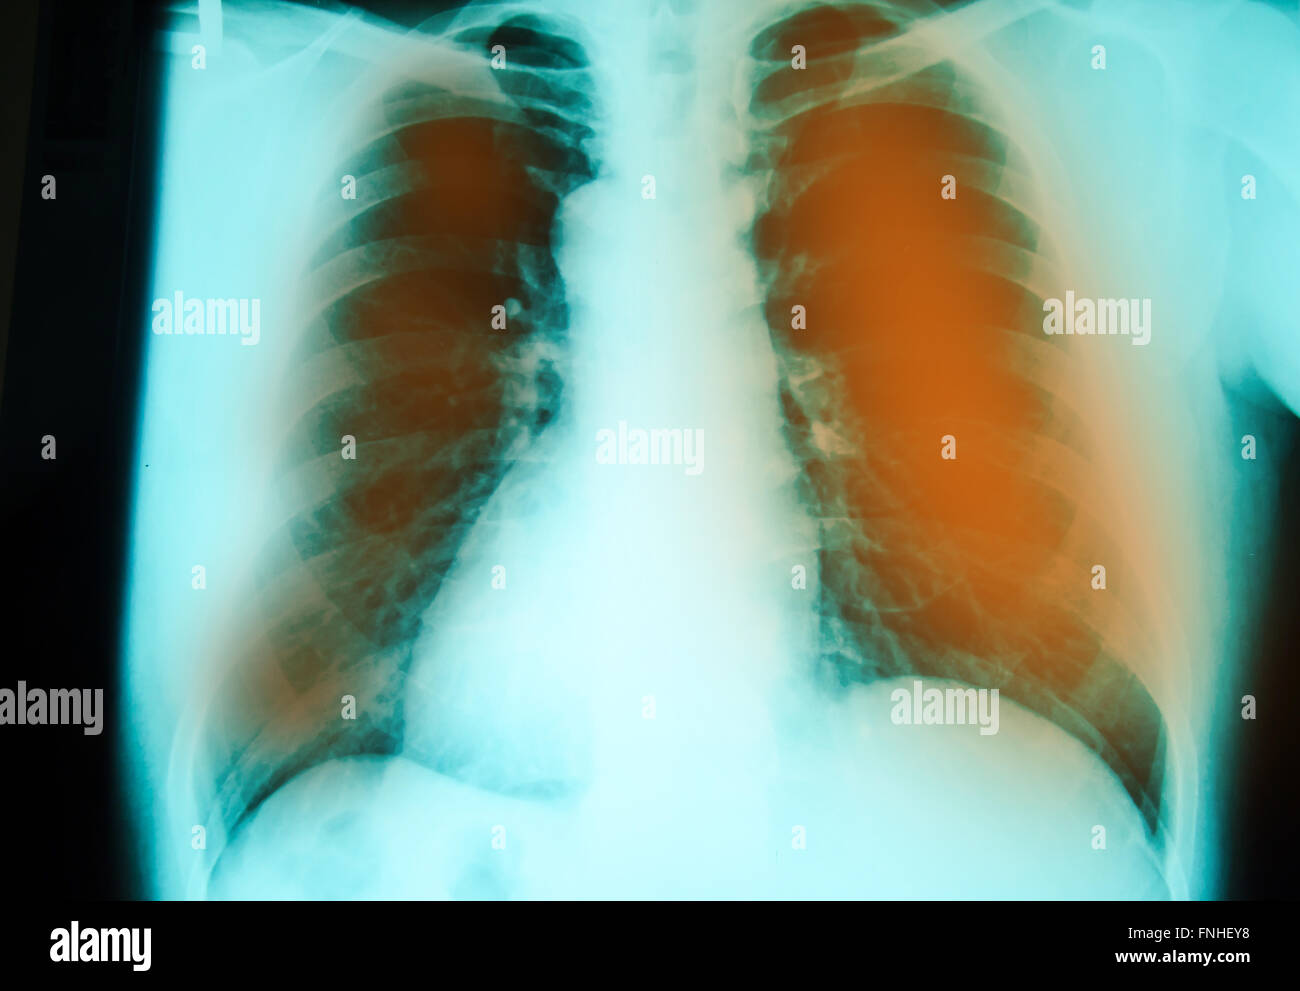 chest x-ray examination for diagnosis Pulmonary tuberculosis infection with both  lung Stock Photo